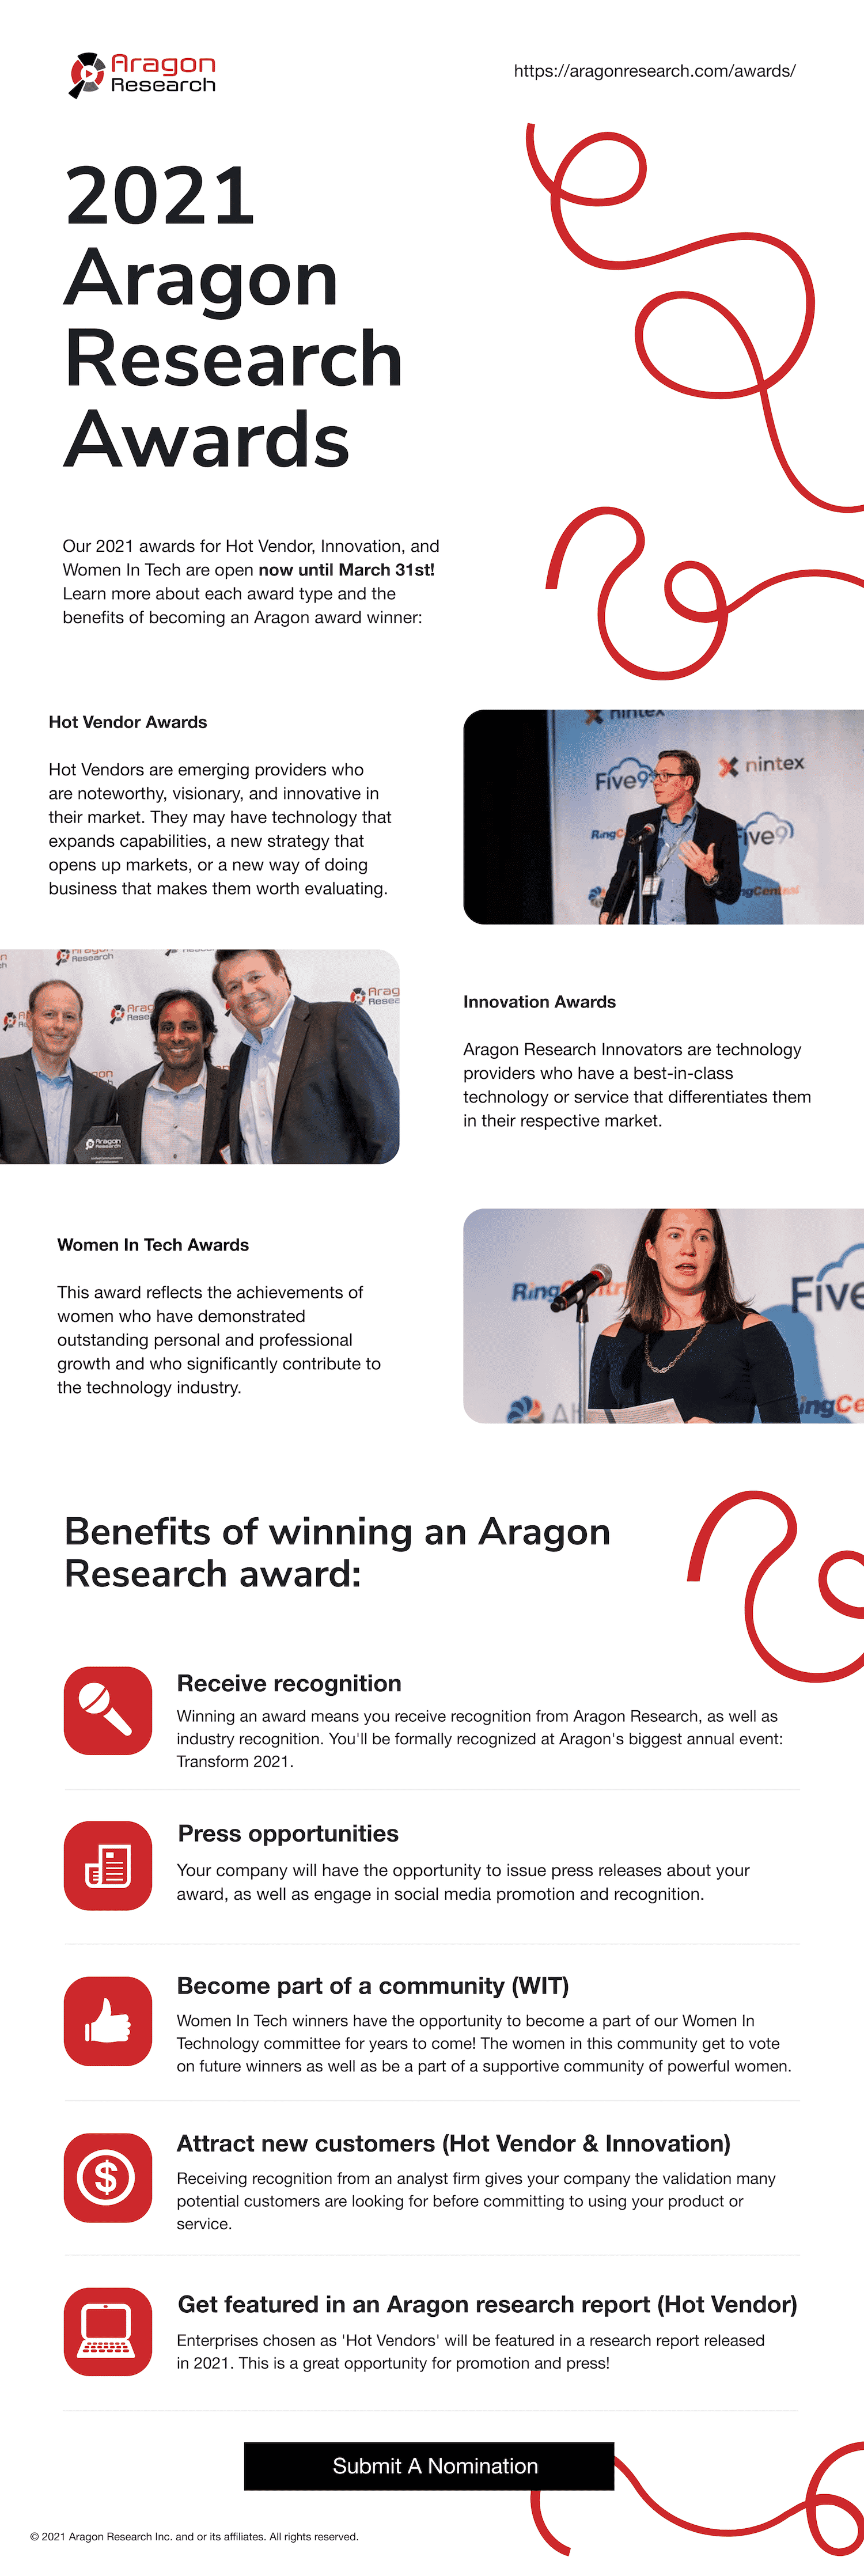 Aragon Research 2021 Awards - [Infographic] 2021 Aragon Research Awards